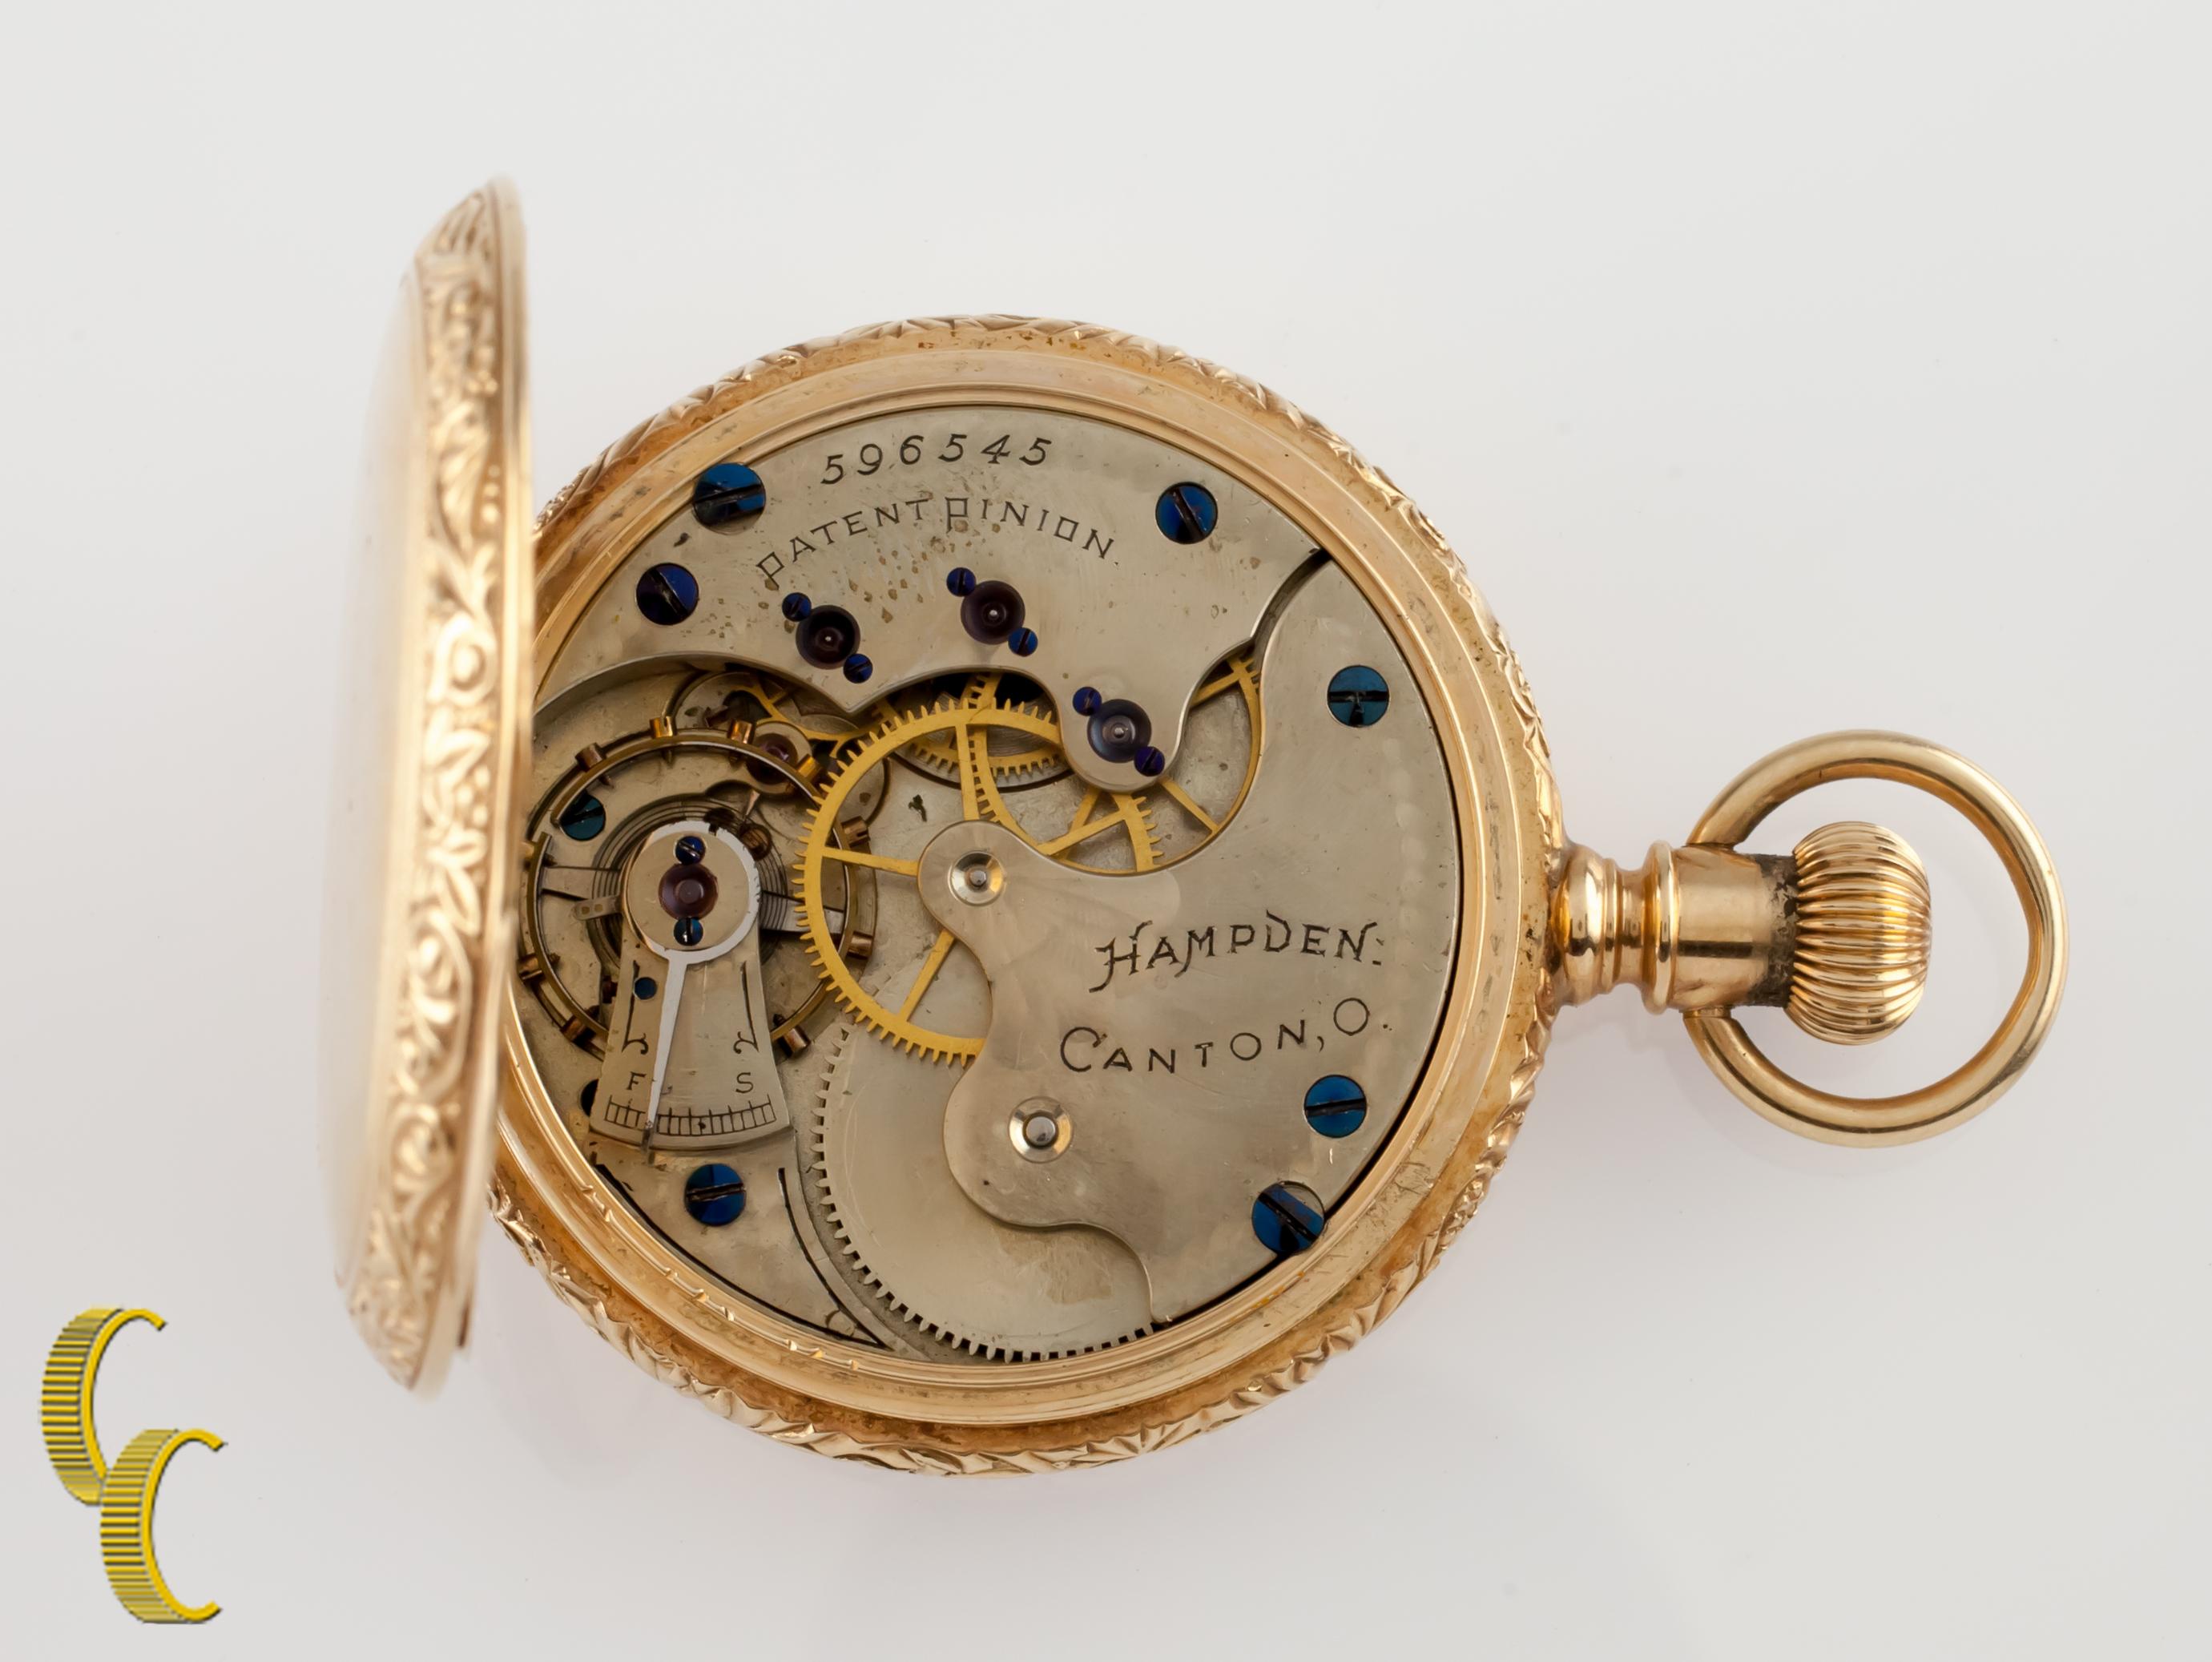 Beautiful Antique Hampden Pocket Watch w/ White Dial Including Cobalt Blue Hands & Dedicated Second Dial
14k Yellow Gold Case w/ Intricate Hand-Etched Repousse Design on Case Edge
Black Roman Numerals
Case Serial #95096
11-Jewel Hampden Movement